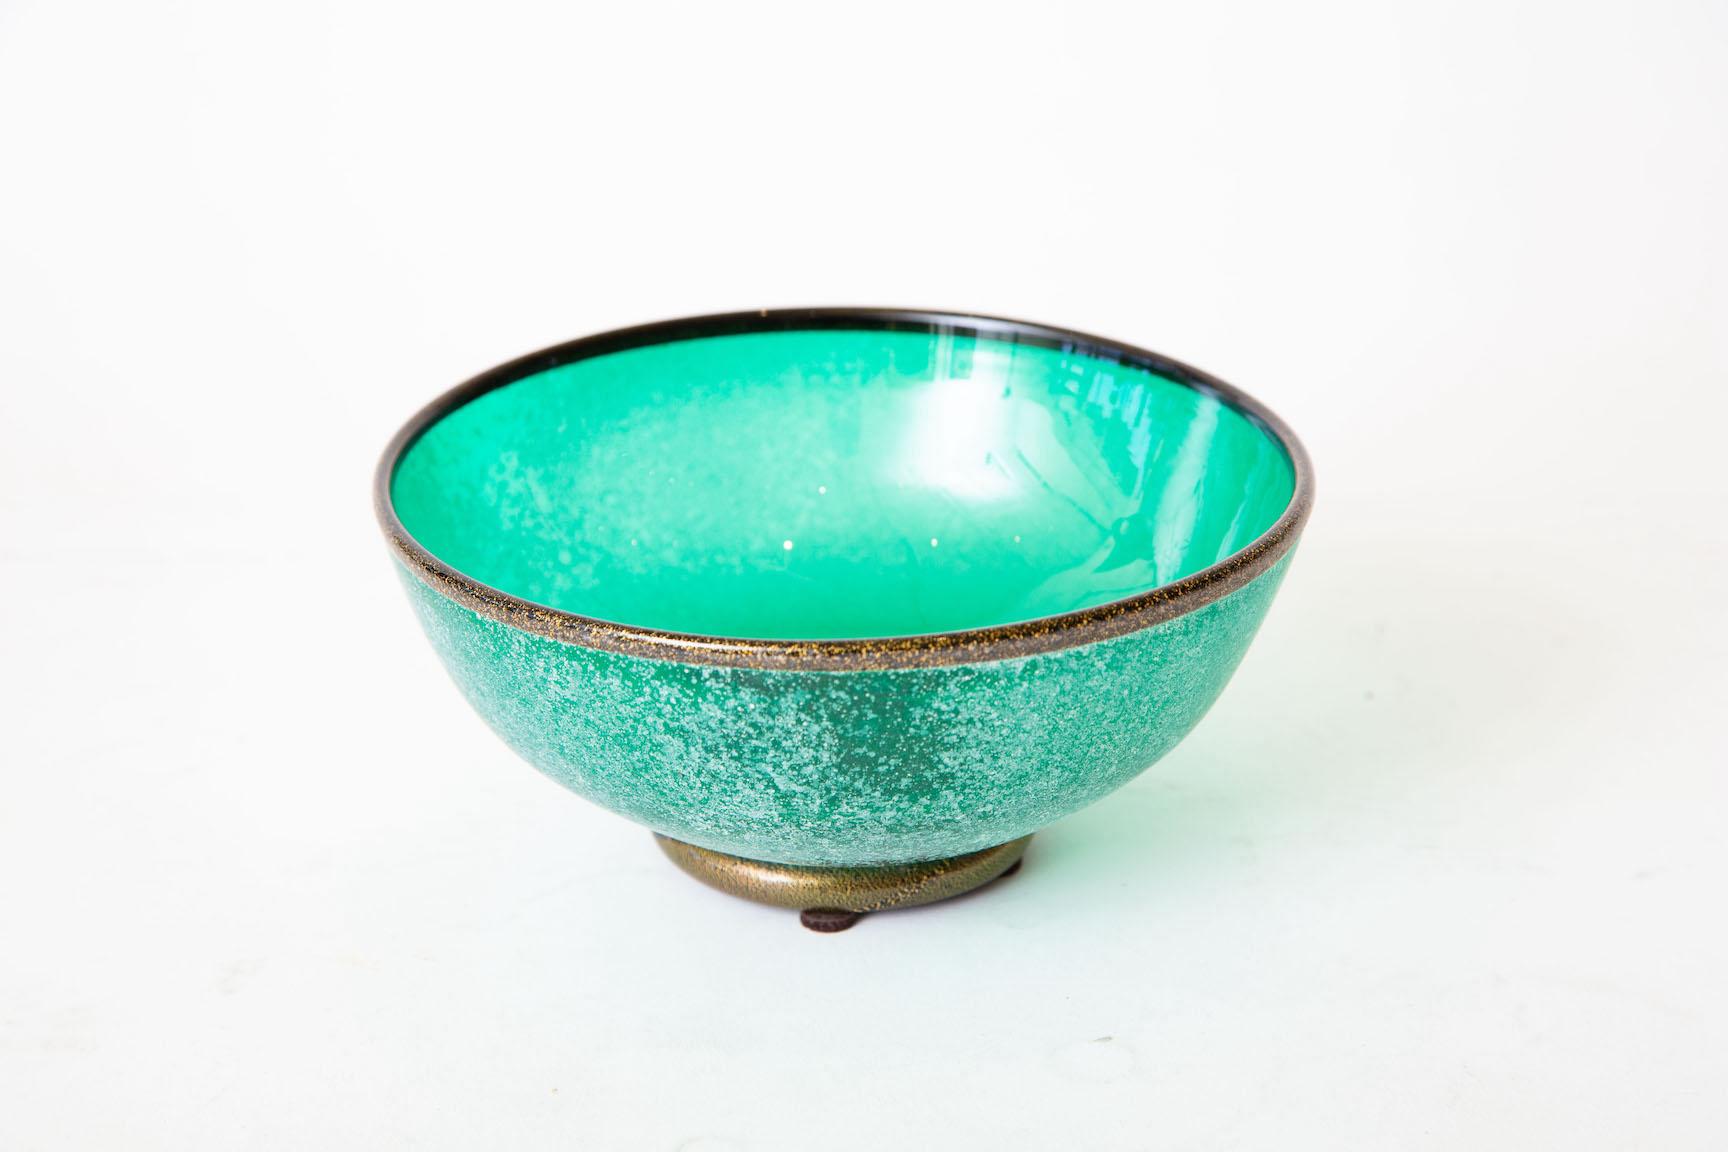 This hallmarked Italian Murano 1980's glass bowl has the scavo technique and is marked Mario Poggi. It is signed on the bottom in script. The partial pair label still exists. The sea green teal turquoise meets emerald green color is beautiful and